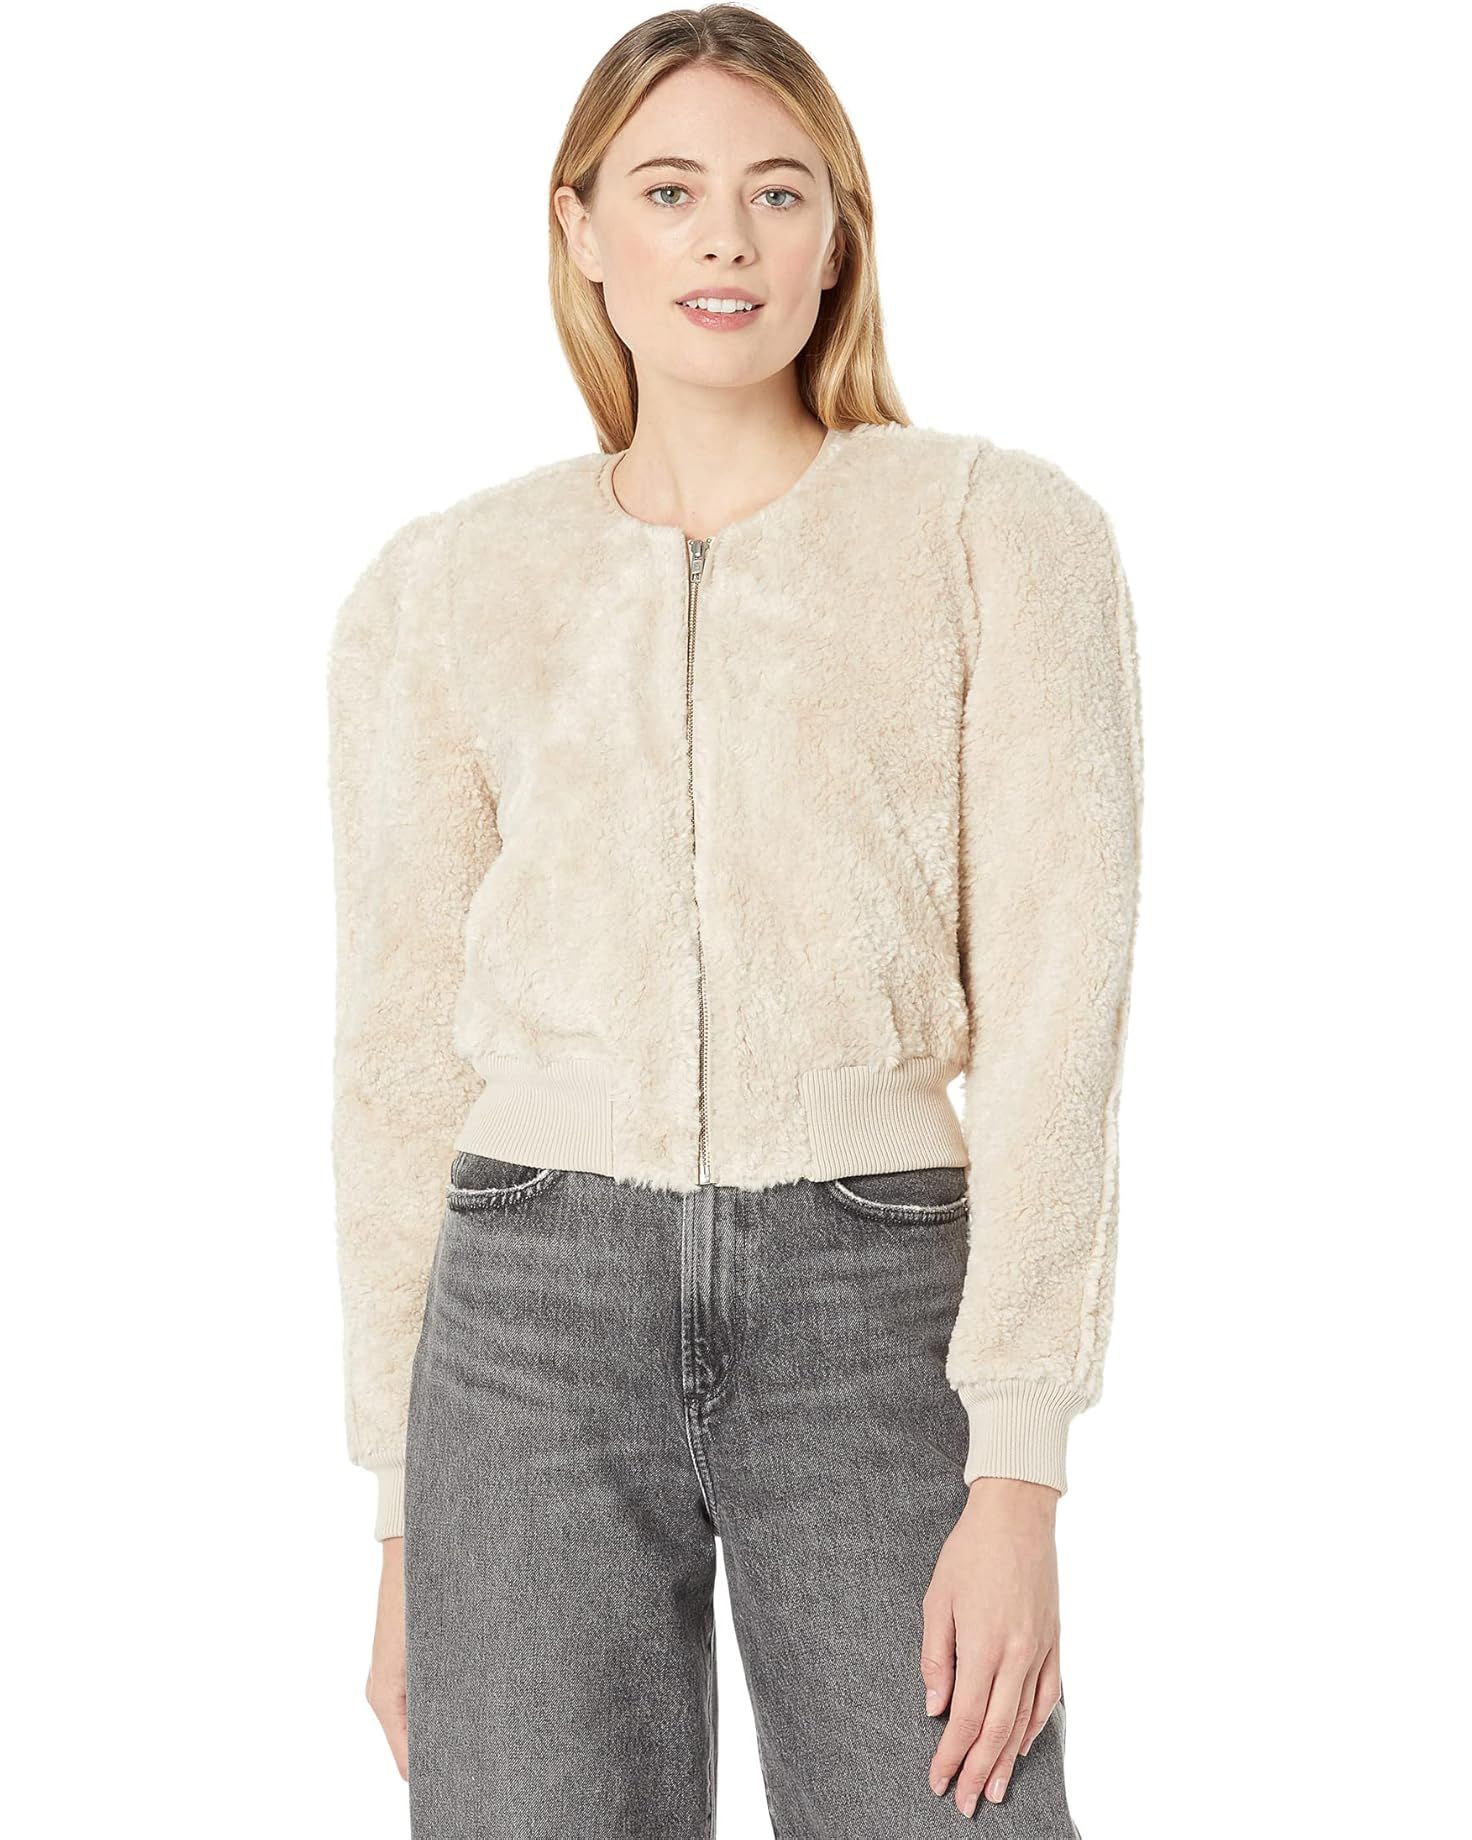 ASTR the Label Stacy Jacket | Zappos